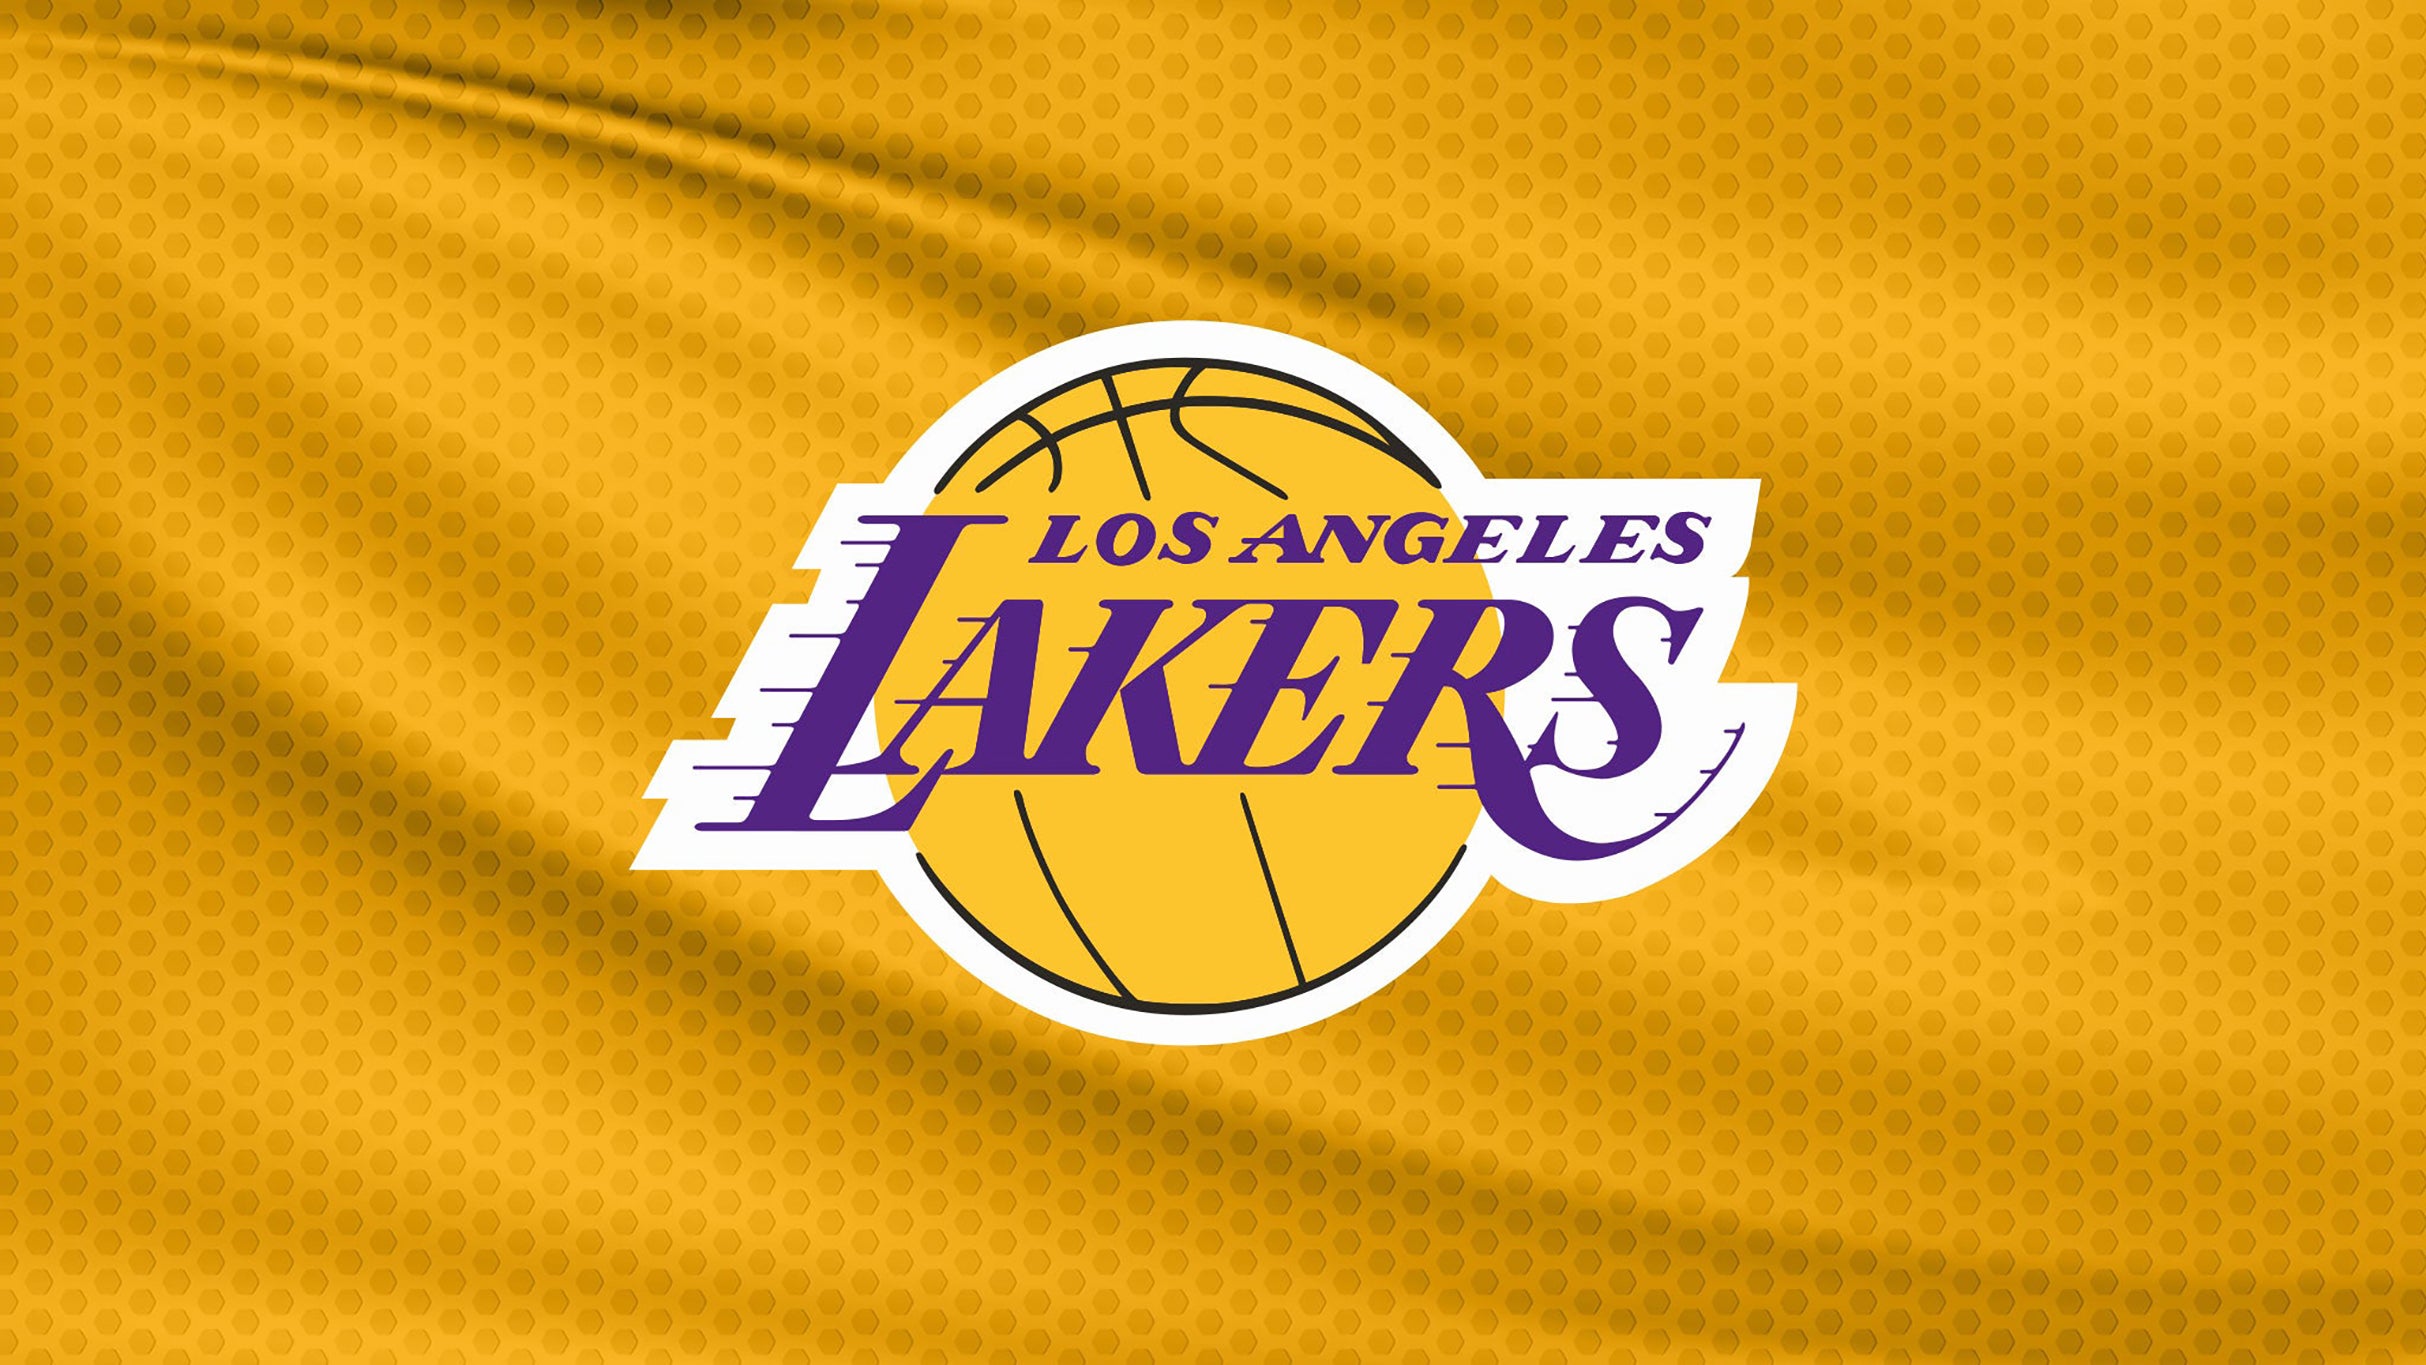 Los Angeles Lakers vs Minnesota Timberwolves in Los Angeles promo photo for Subscribers presale offer code